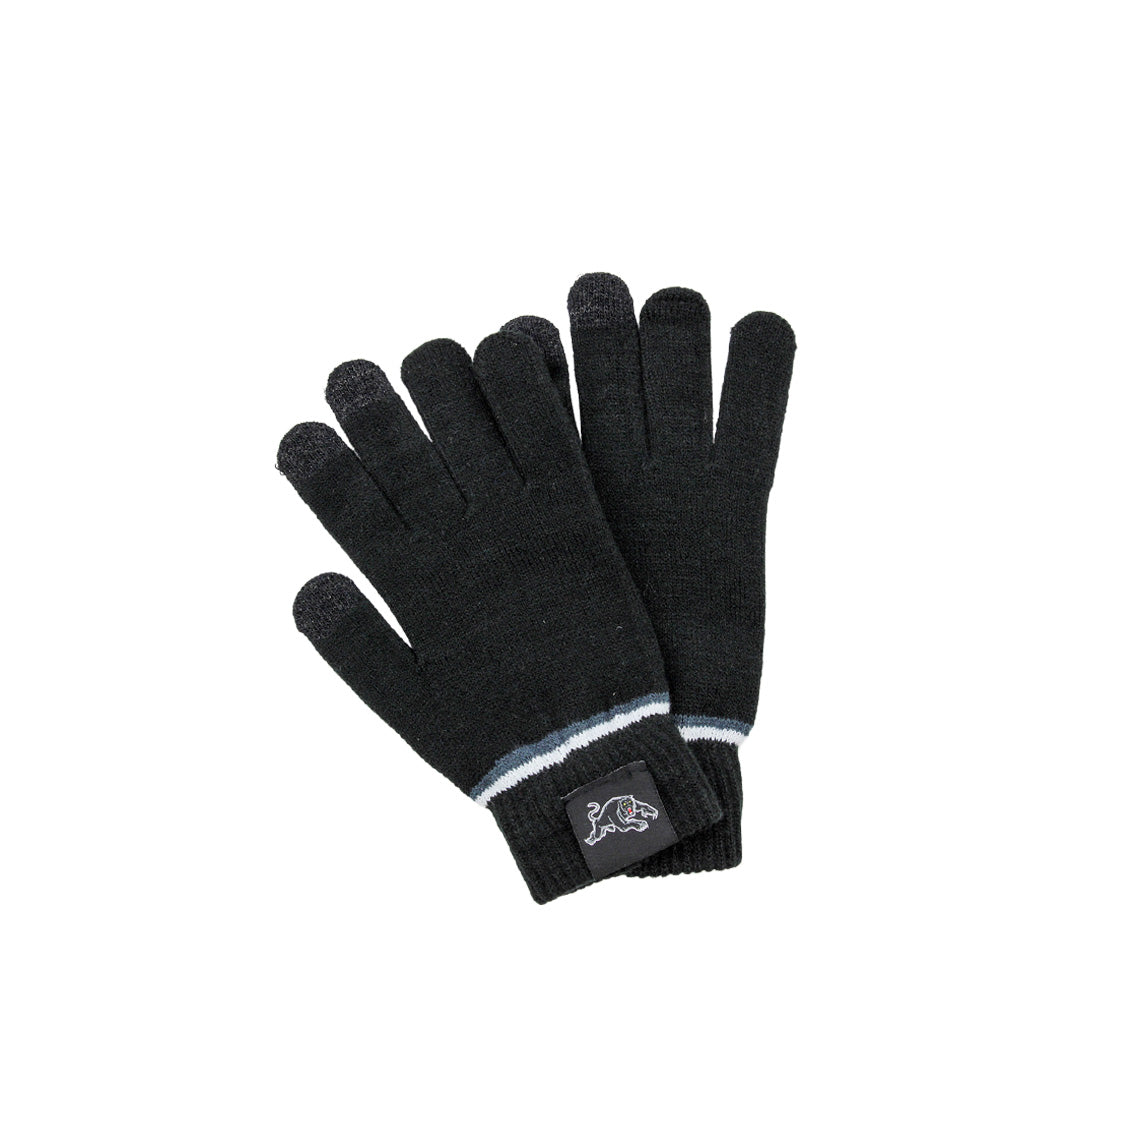 PENRITH PANTHERS NRL TOUCHSCREEN GLOVES_PENRITH PANTHERS_STUBBY CLUB